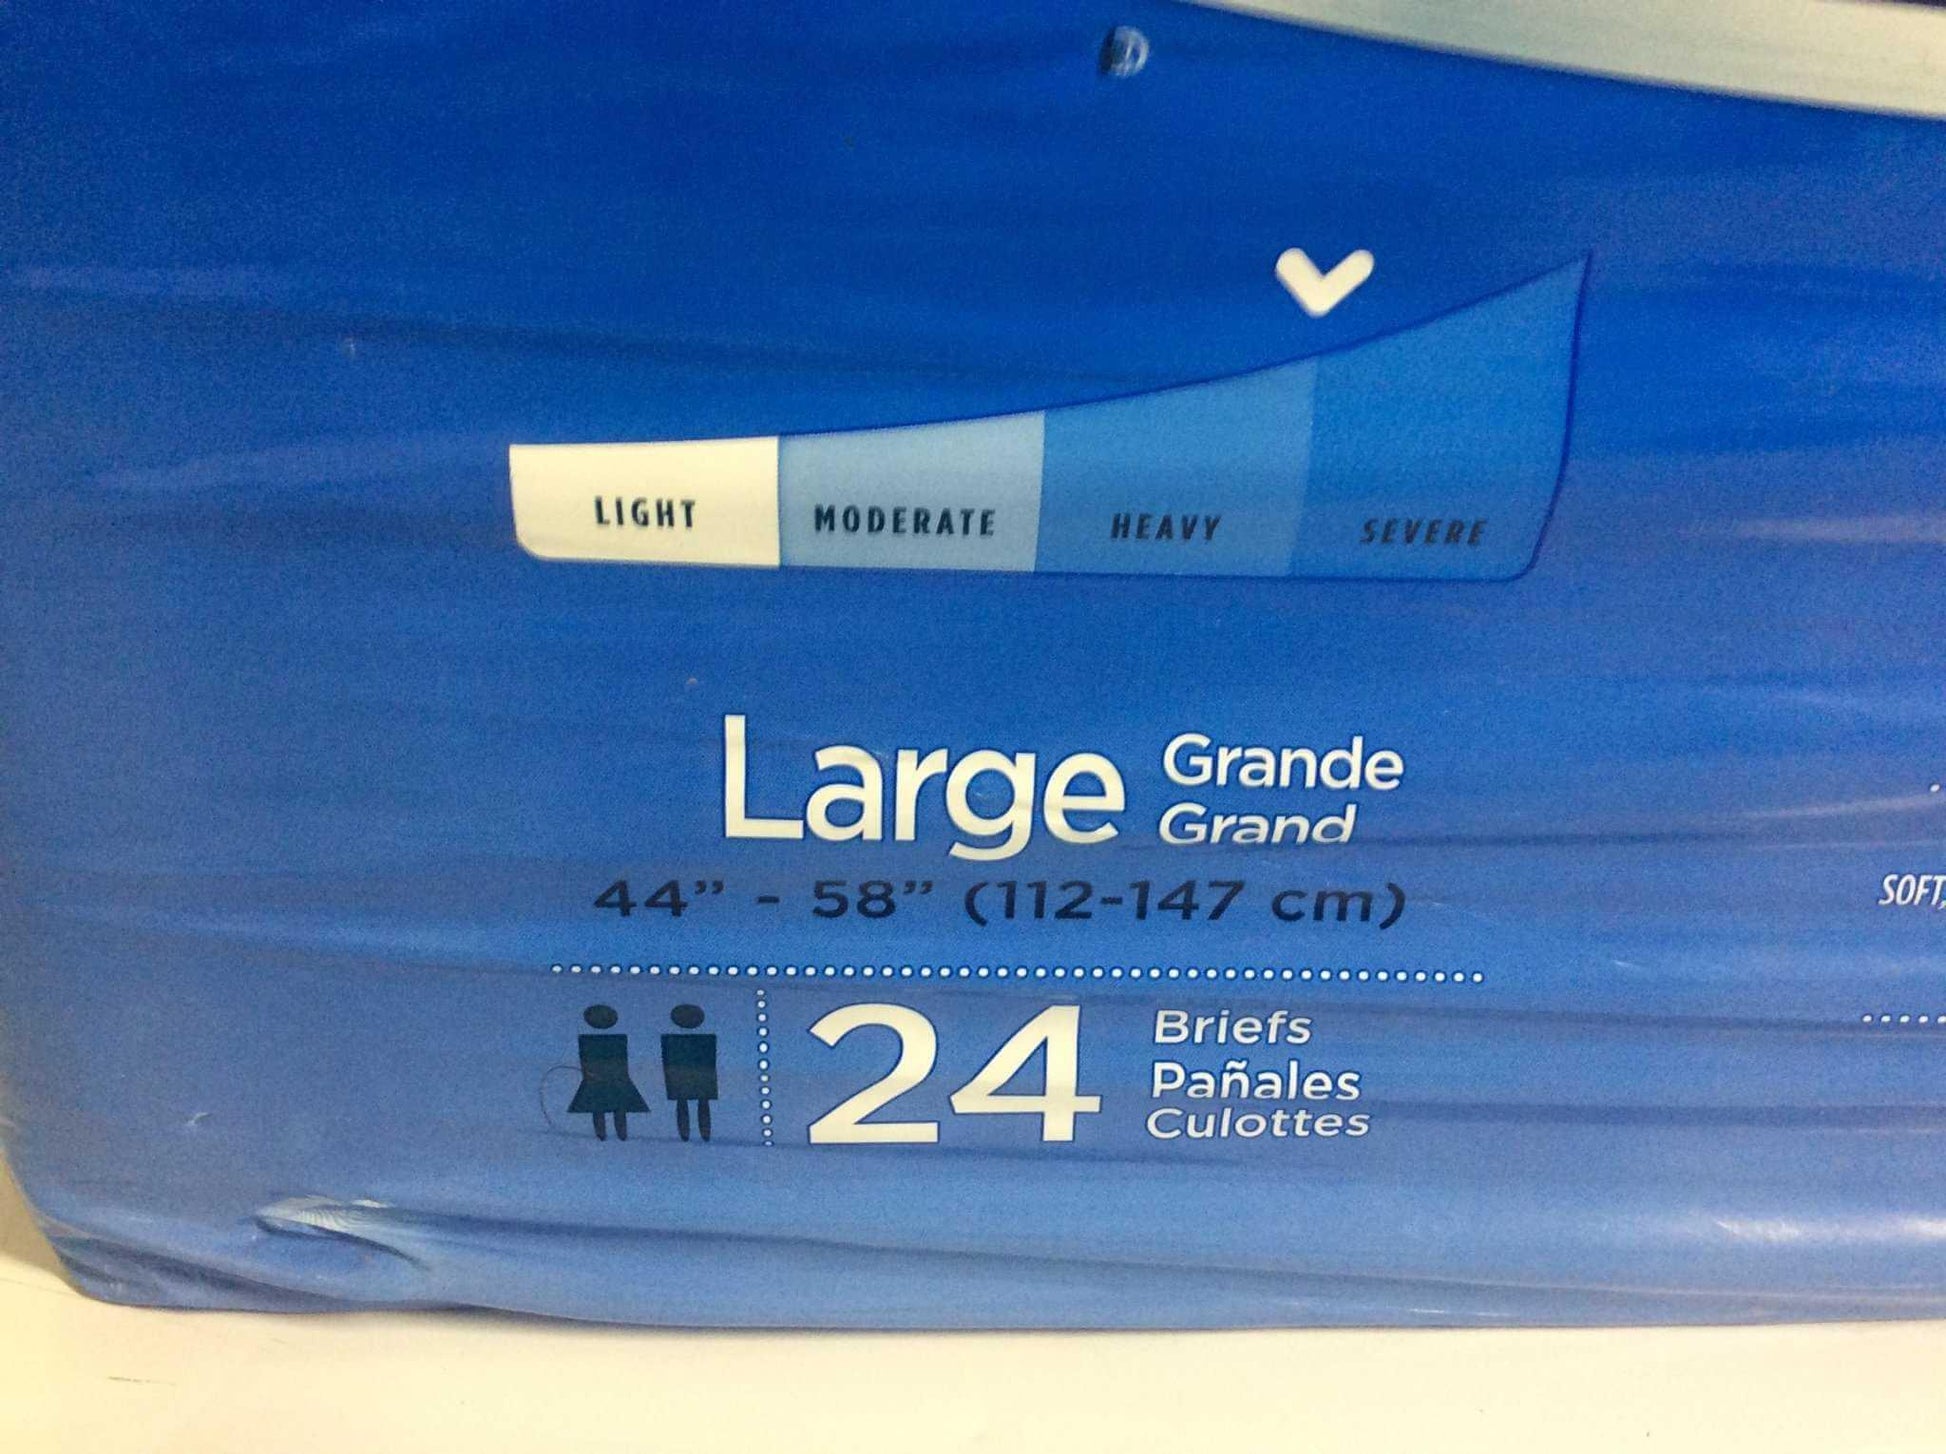 Lot of 2 NEW Attends Large Classic Heavy Absorbency Briefs Packs BRB3096 - MBR Medicals